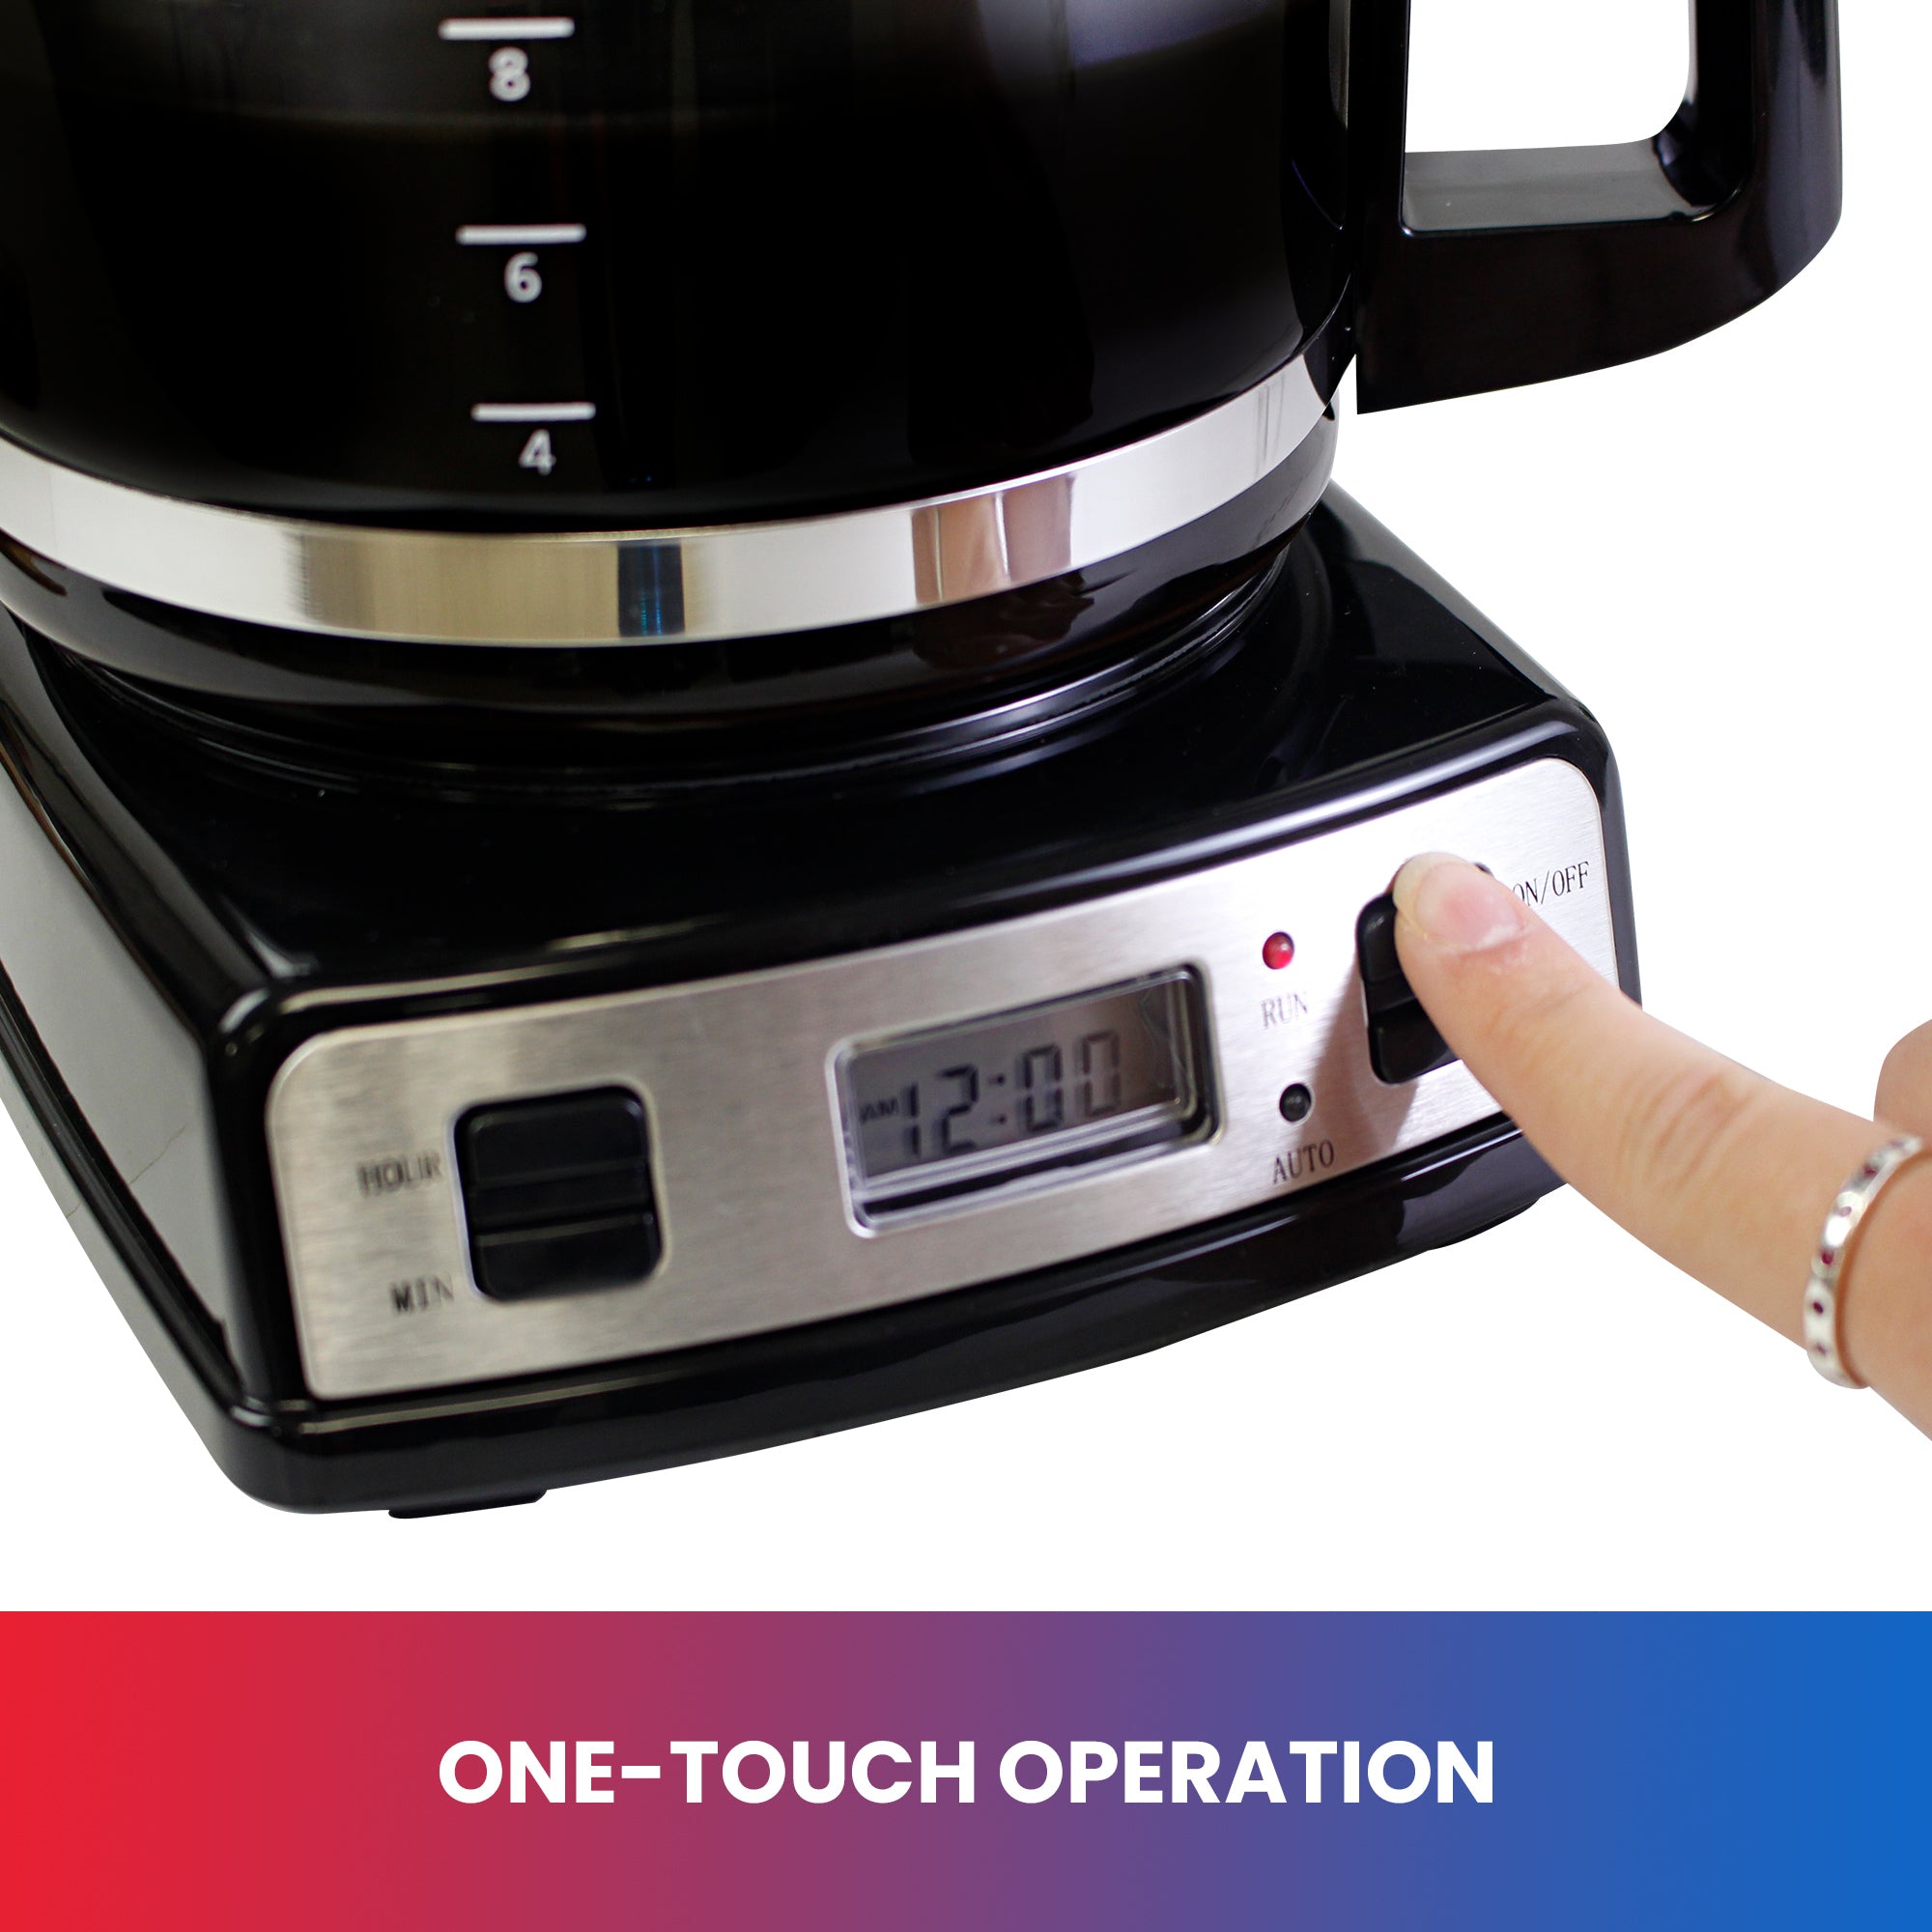 Closeup image of coffee brewer controls with a person's finger pressing the power button. Text below reads, "One-touch operation"